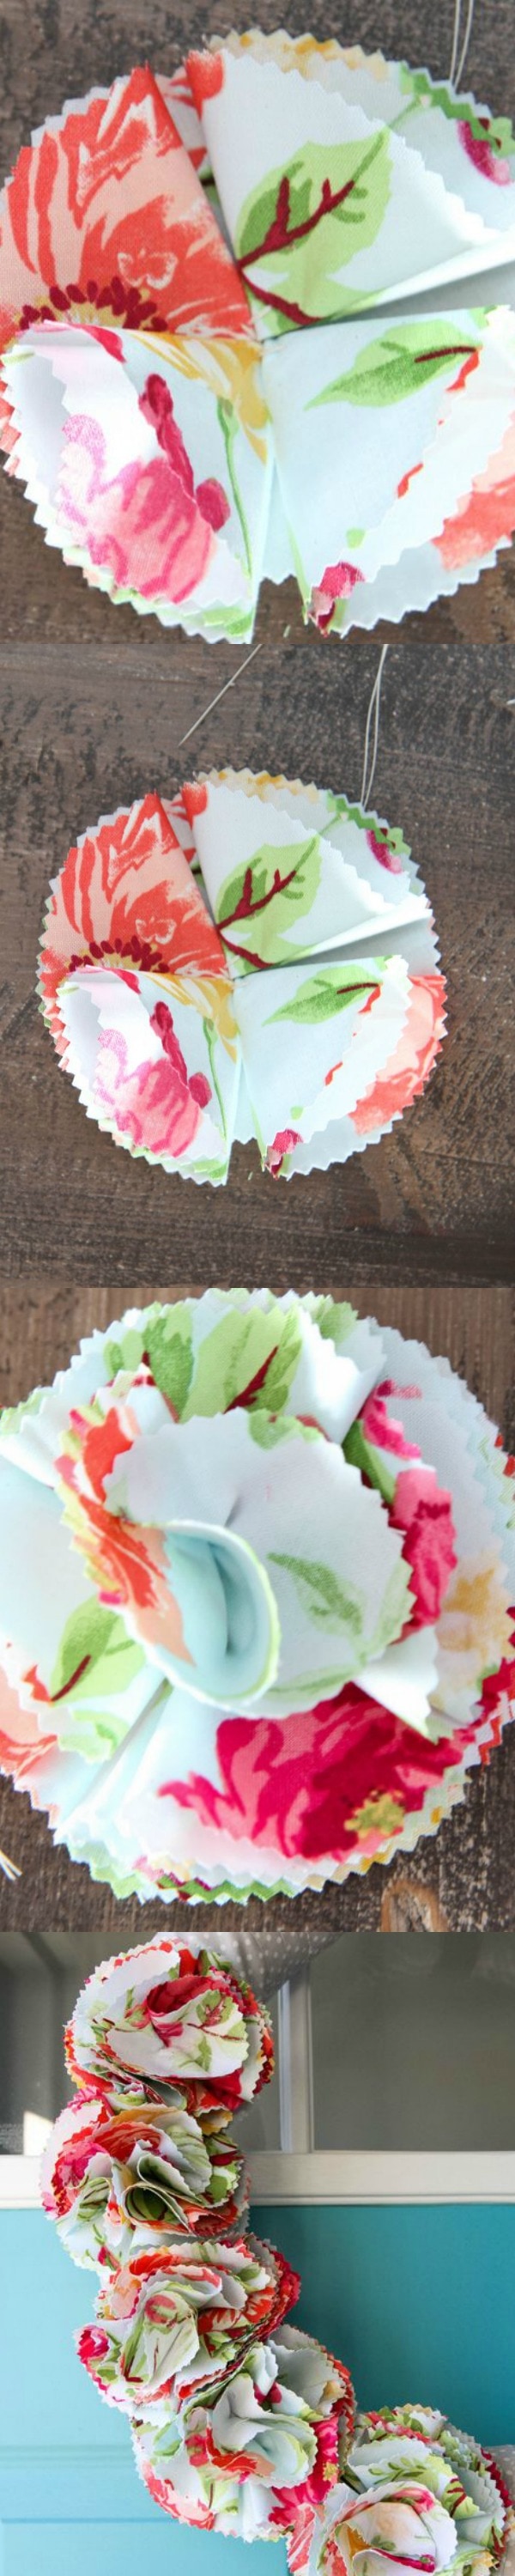 How to Make Fabric Flowers from MomAdvice.com